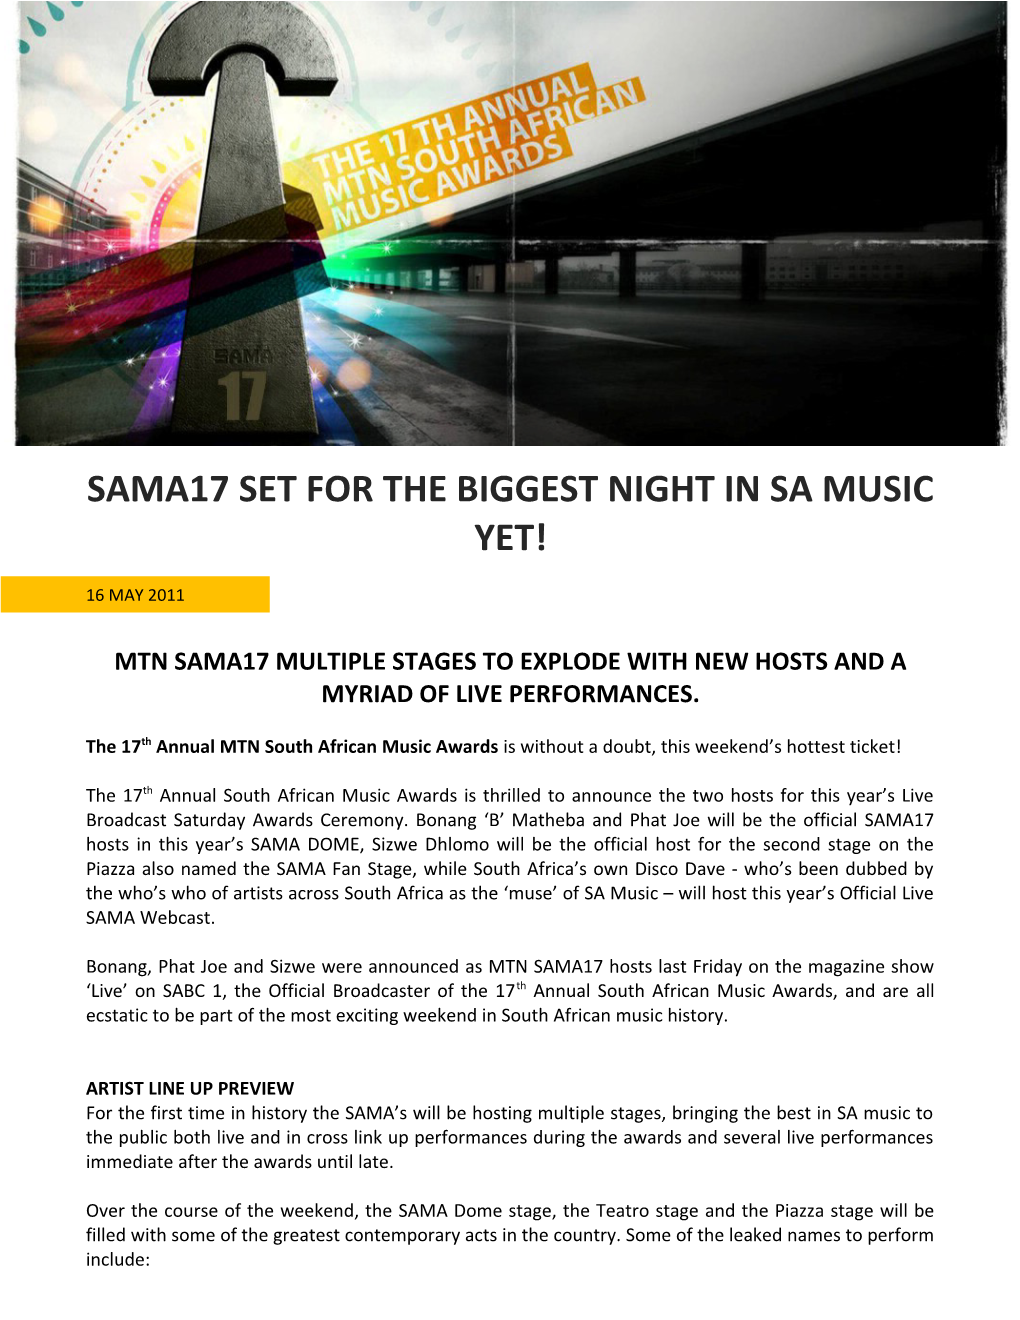 Sama17 Set for the Biggest Night in Sa Music Yet!